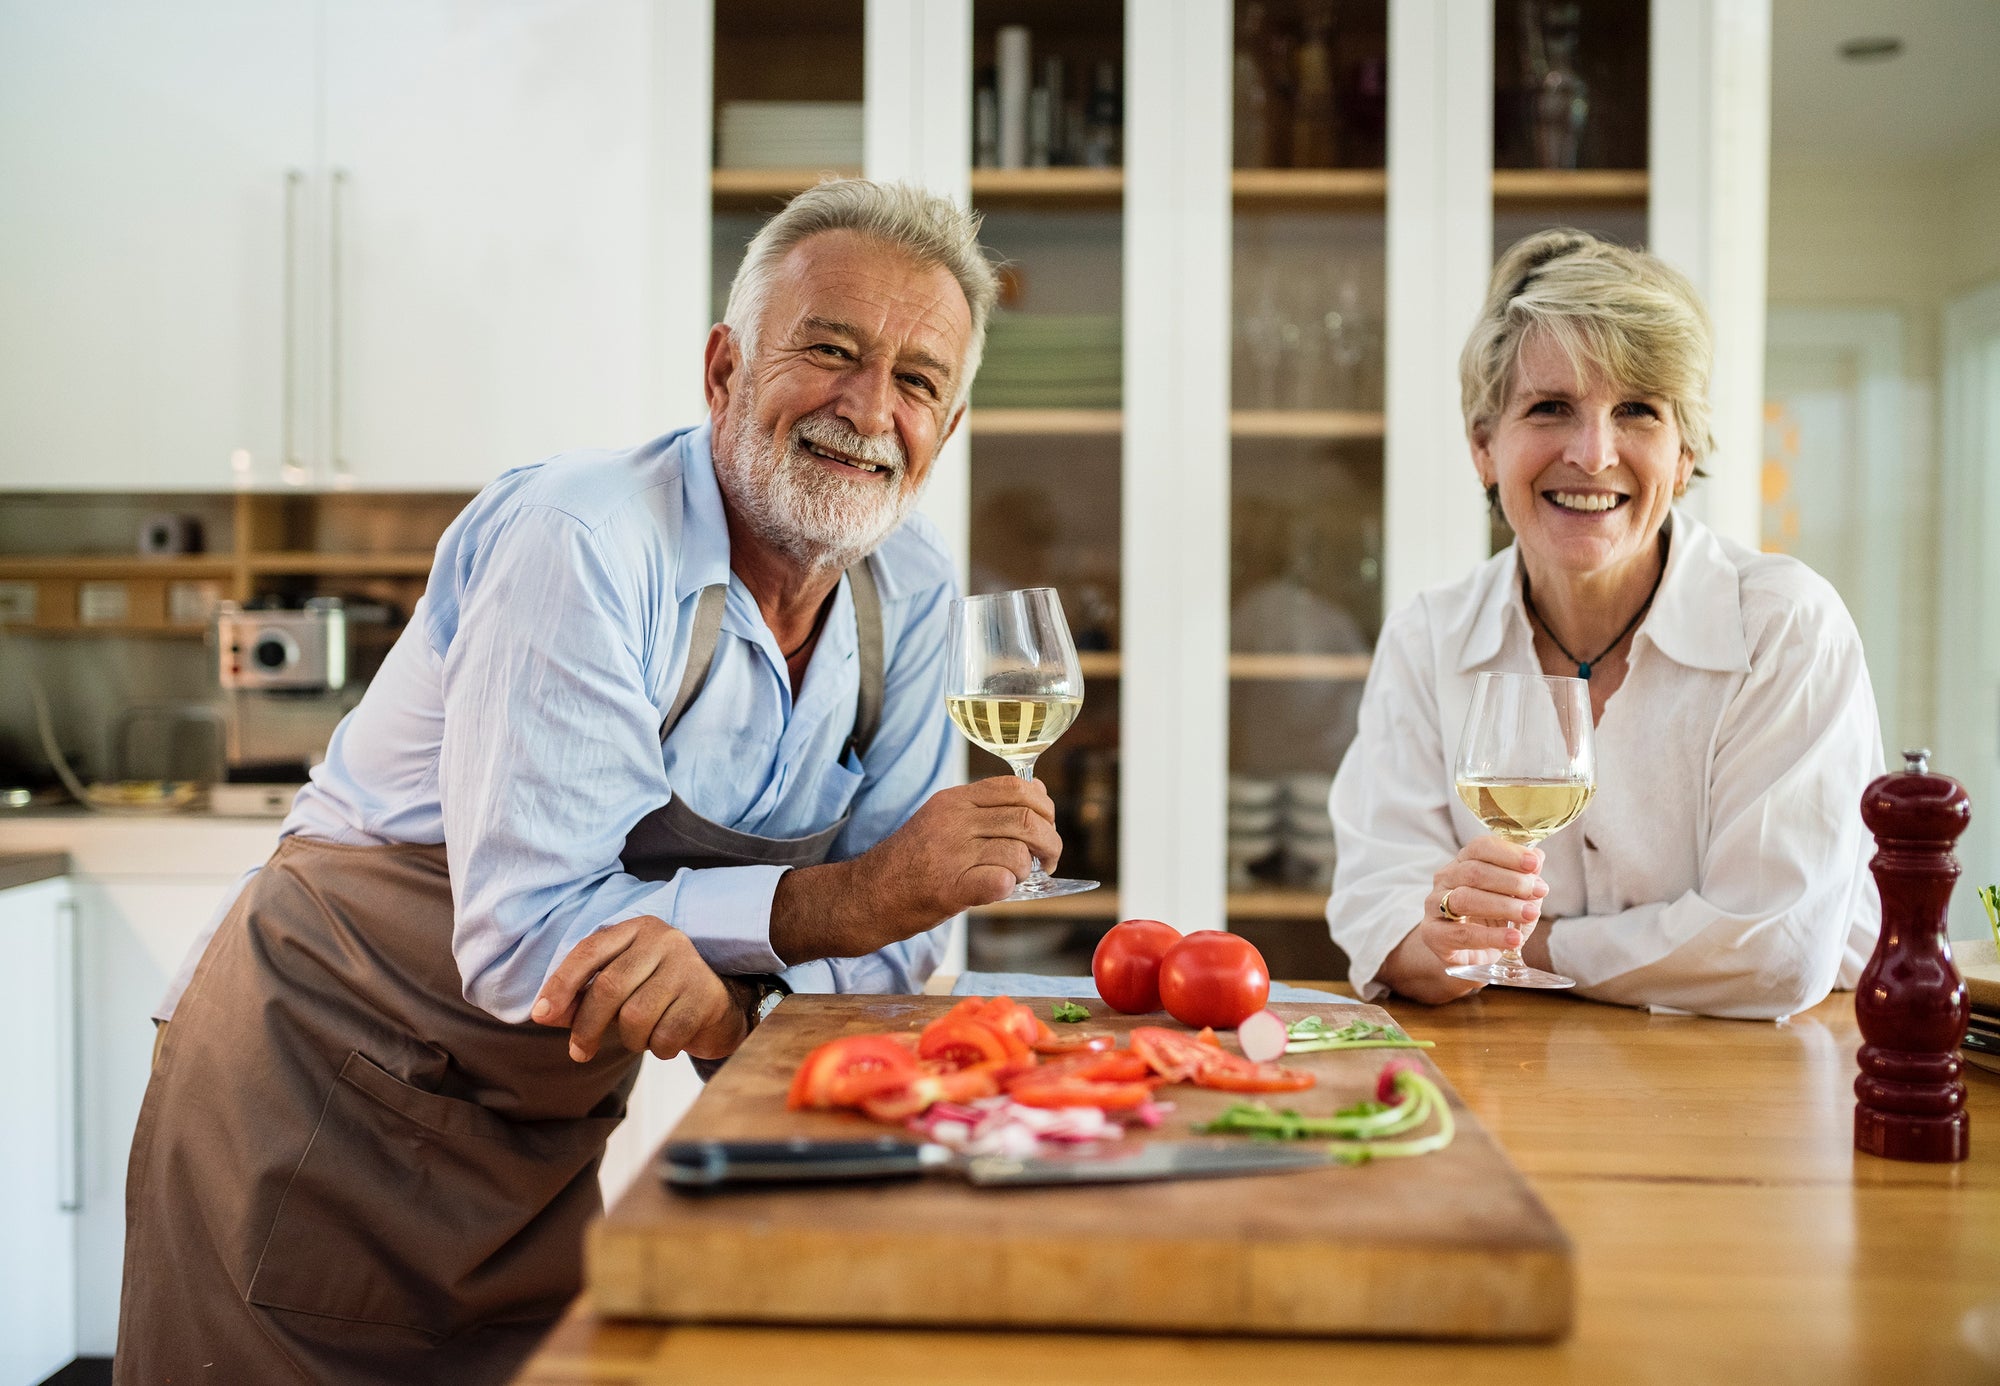 Elderly couple with a glass of wine enjoying healthy Mediterranean appetizers